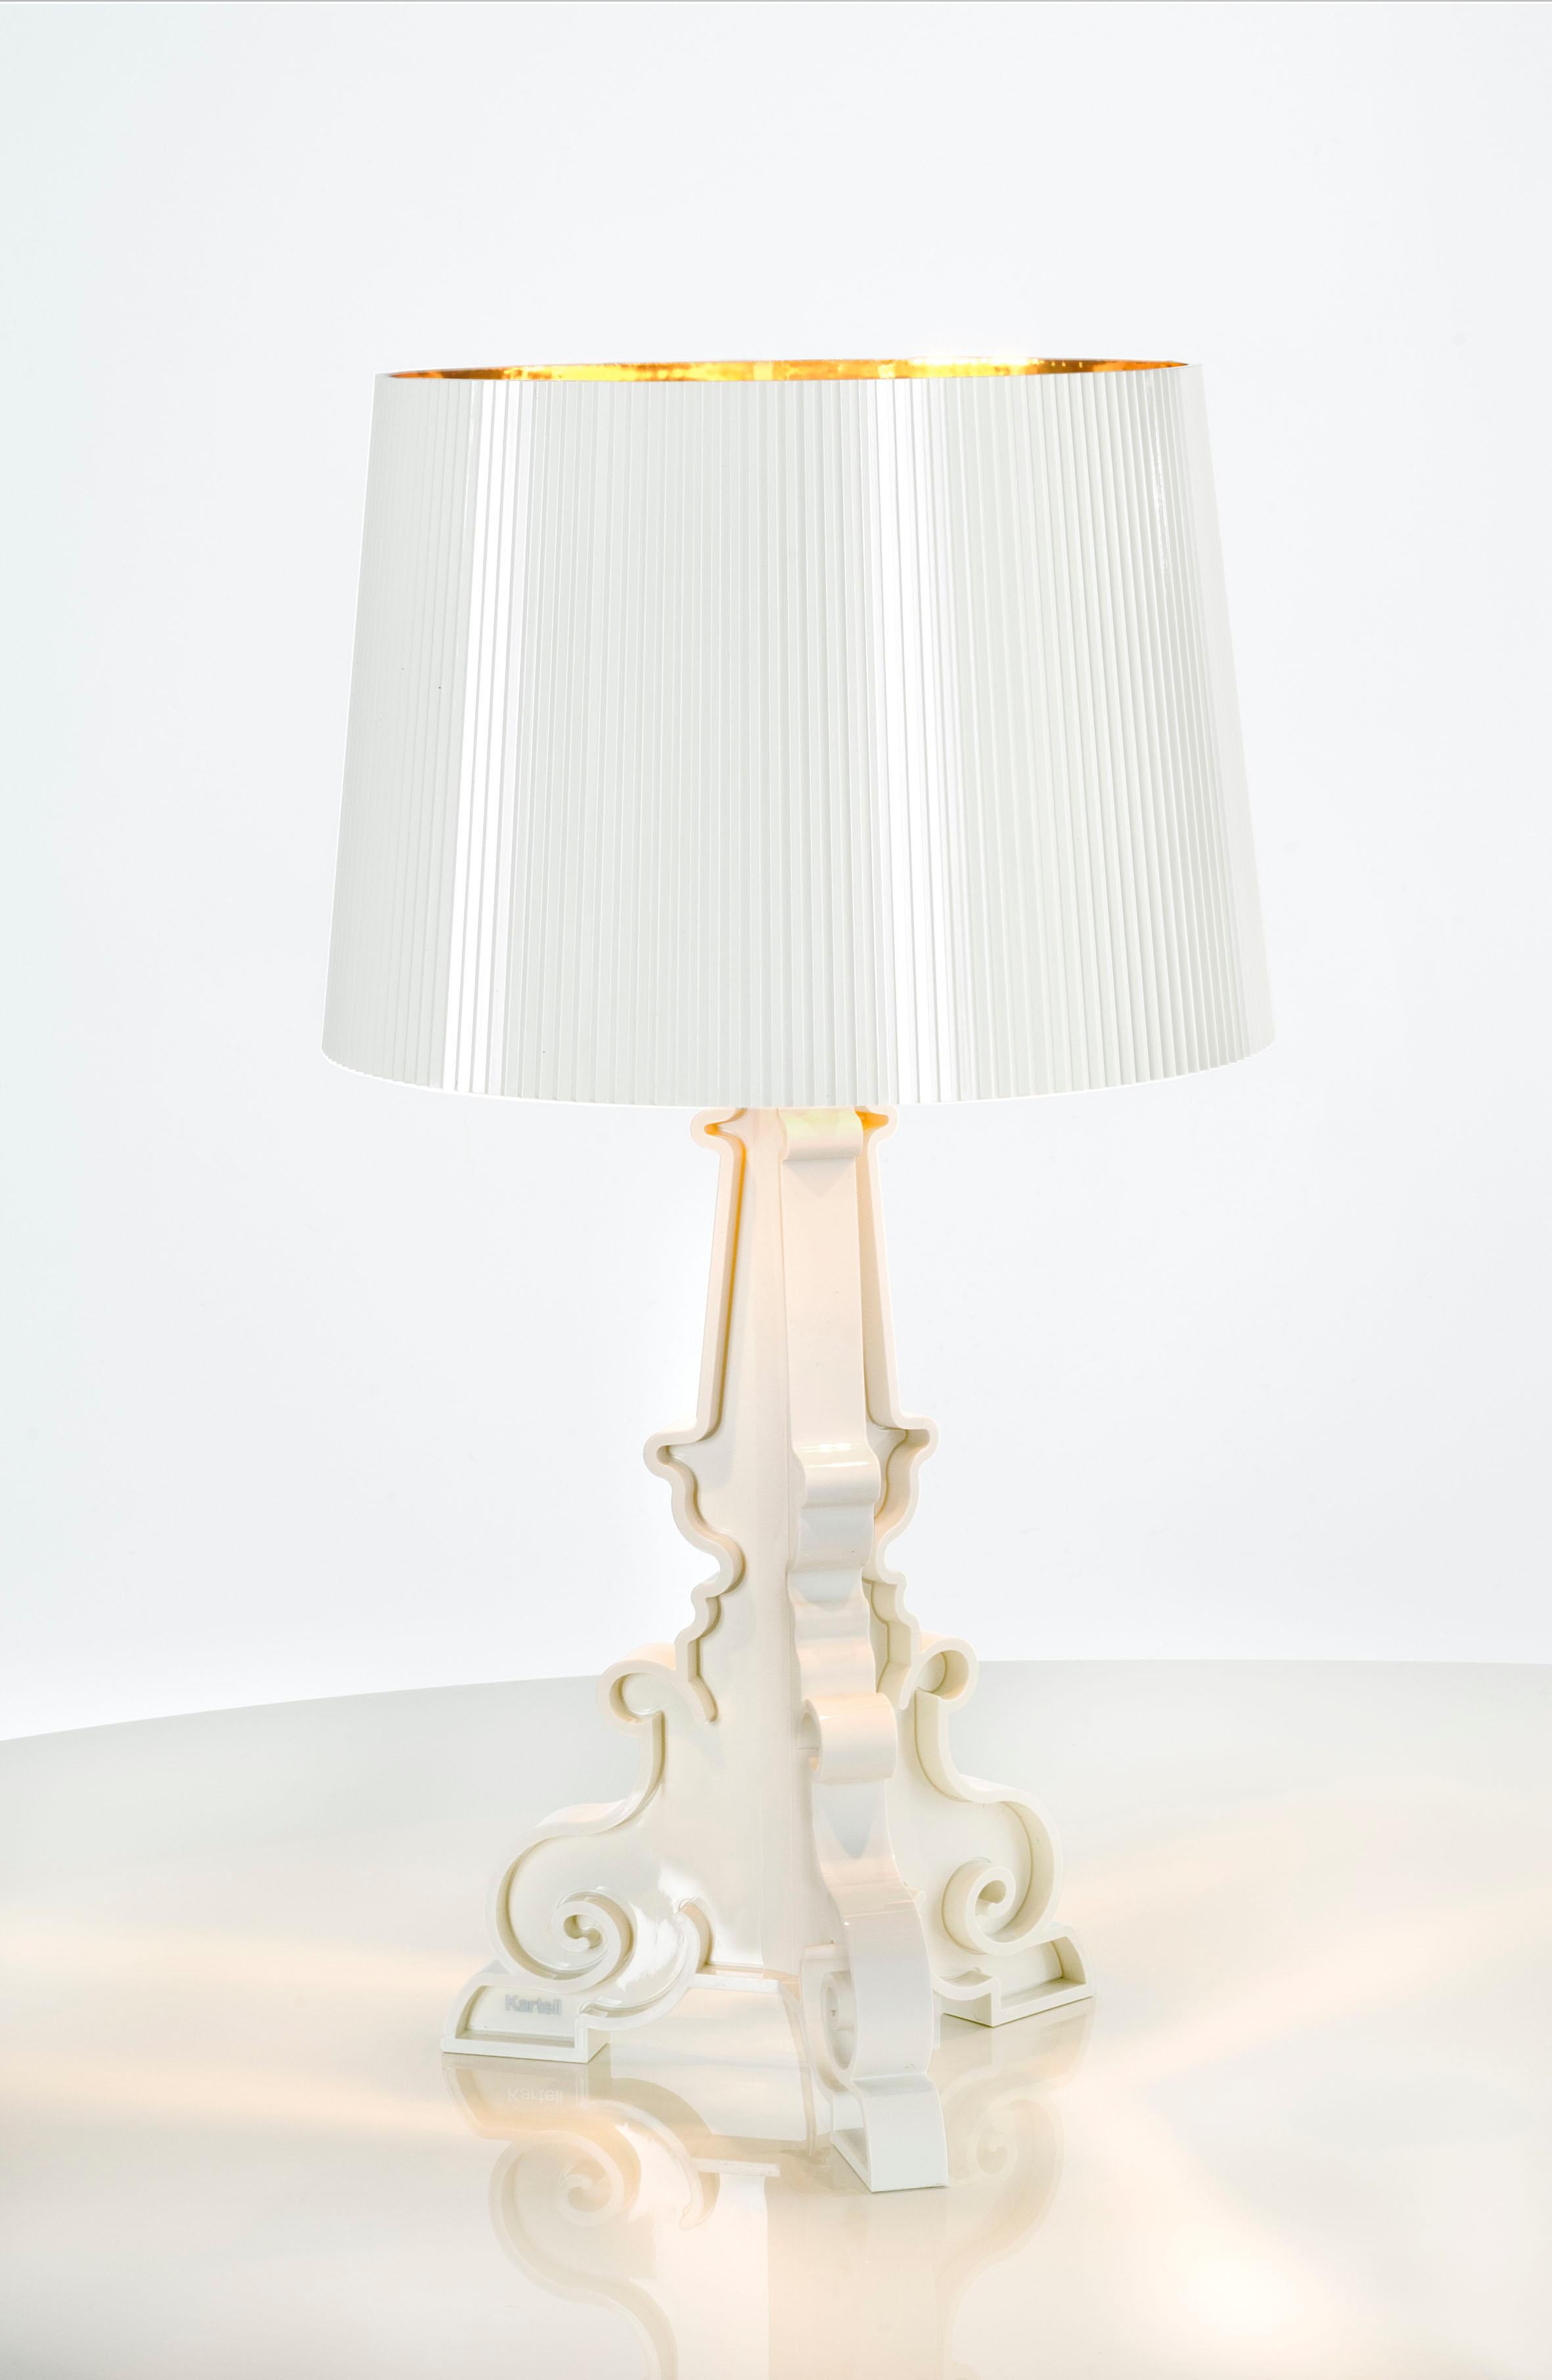 A lamp with an inimitable style, Bourgie is one of Kartell’s best sellers, skillfully combining Classic style, richness and tradition with innovation and irony. The Baroque style base is composed of three interconnecting decorated layers, while the